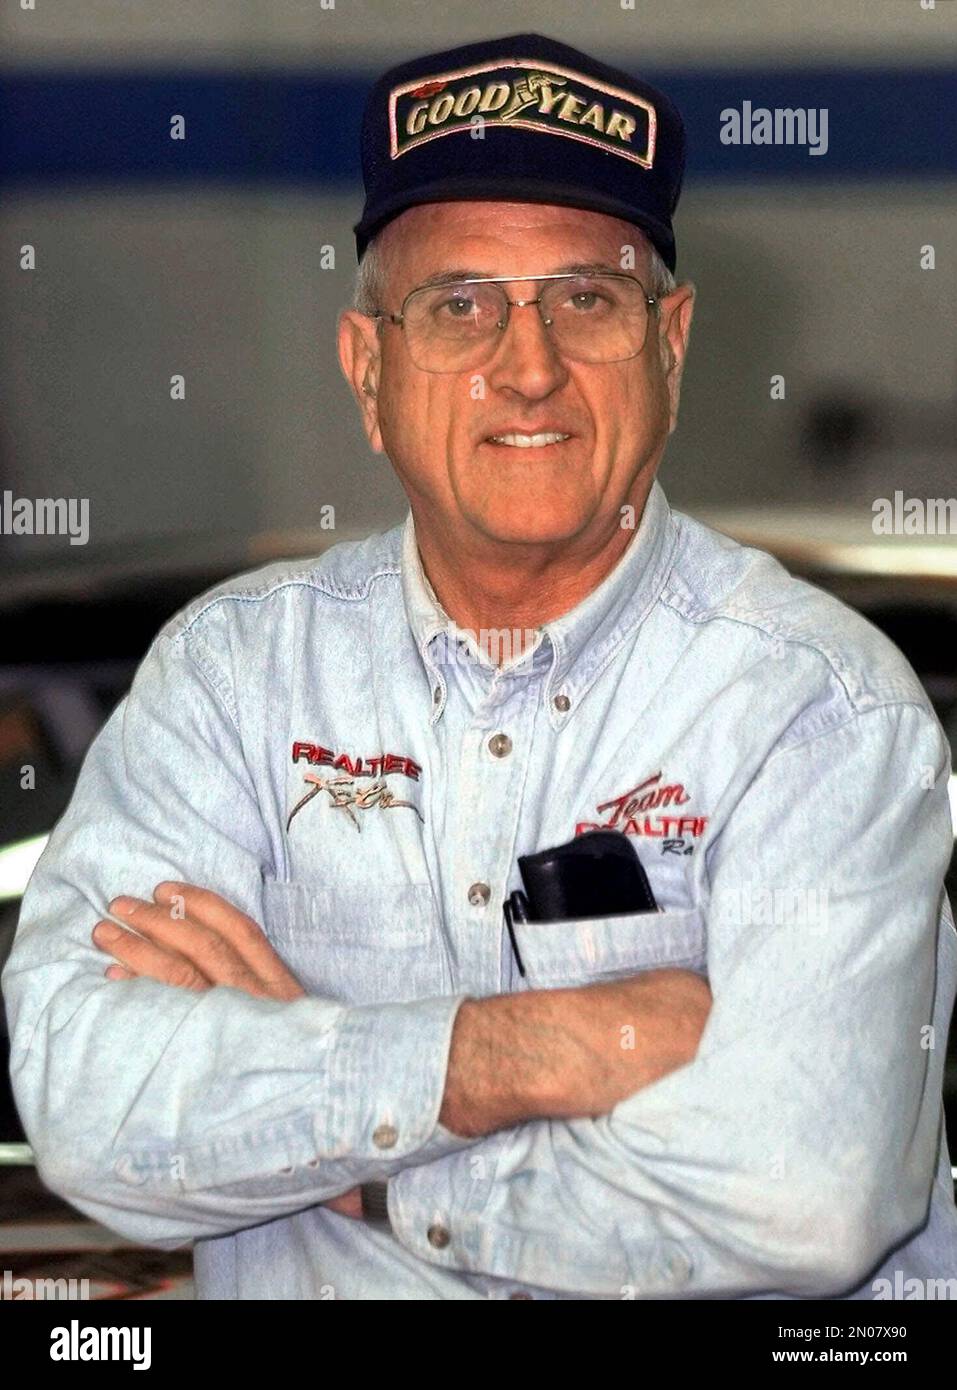 In this photo taken March 30, 2001 veteran NASCAR driver Dave Marcis is  shown in his Arden, N.C. race shop. Only 39 cars showed up for the second  race of the Sprint Cup season, the lowest number of entries in more than  two decades. While the reduced